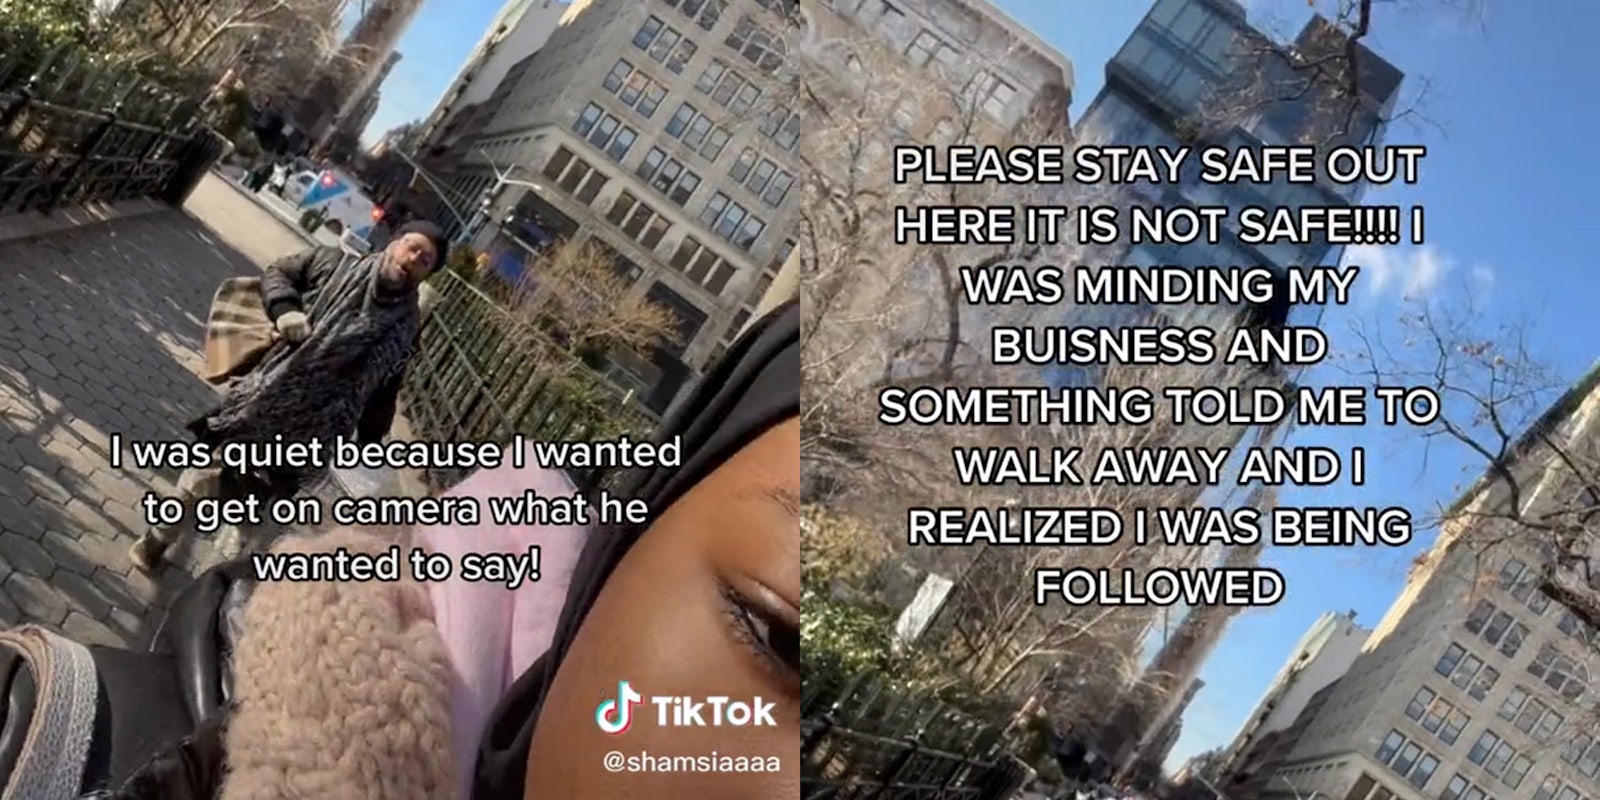 man following woman with caption 'i was quiet because i wanted to get on camera what he wanted to say!' (l) city buildings with caption 'please stay safe out here it is not safe!!! I was minding my buisness and something told me to walk away and i realized i was being followed' (r)